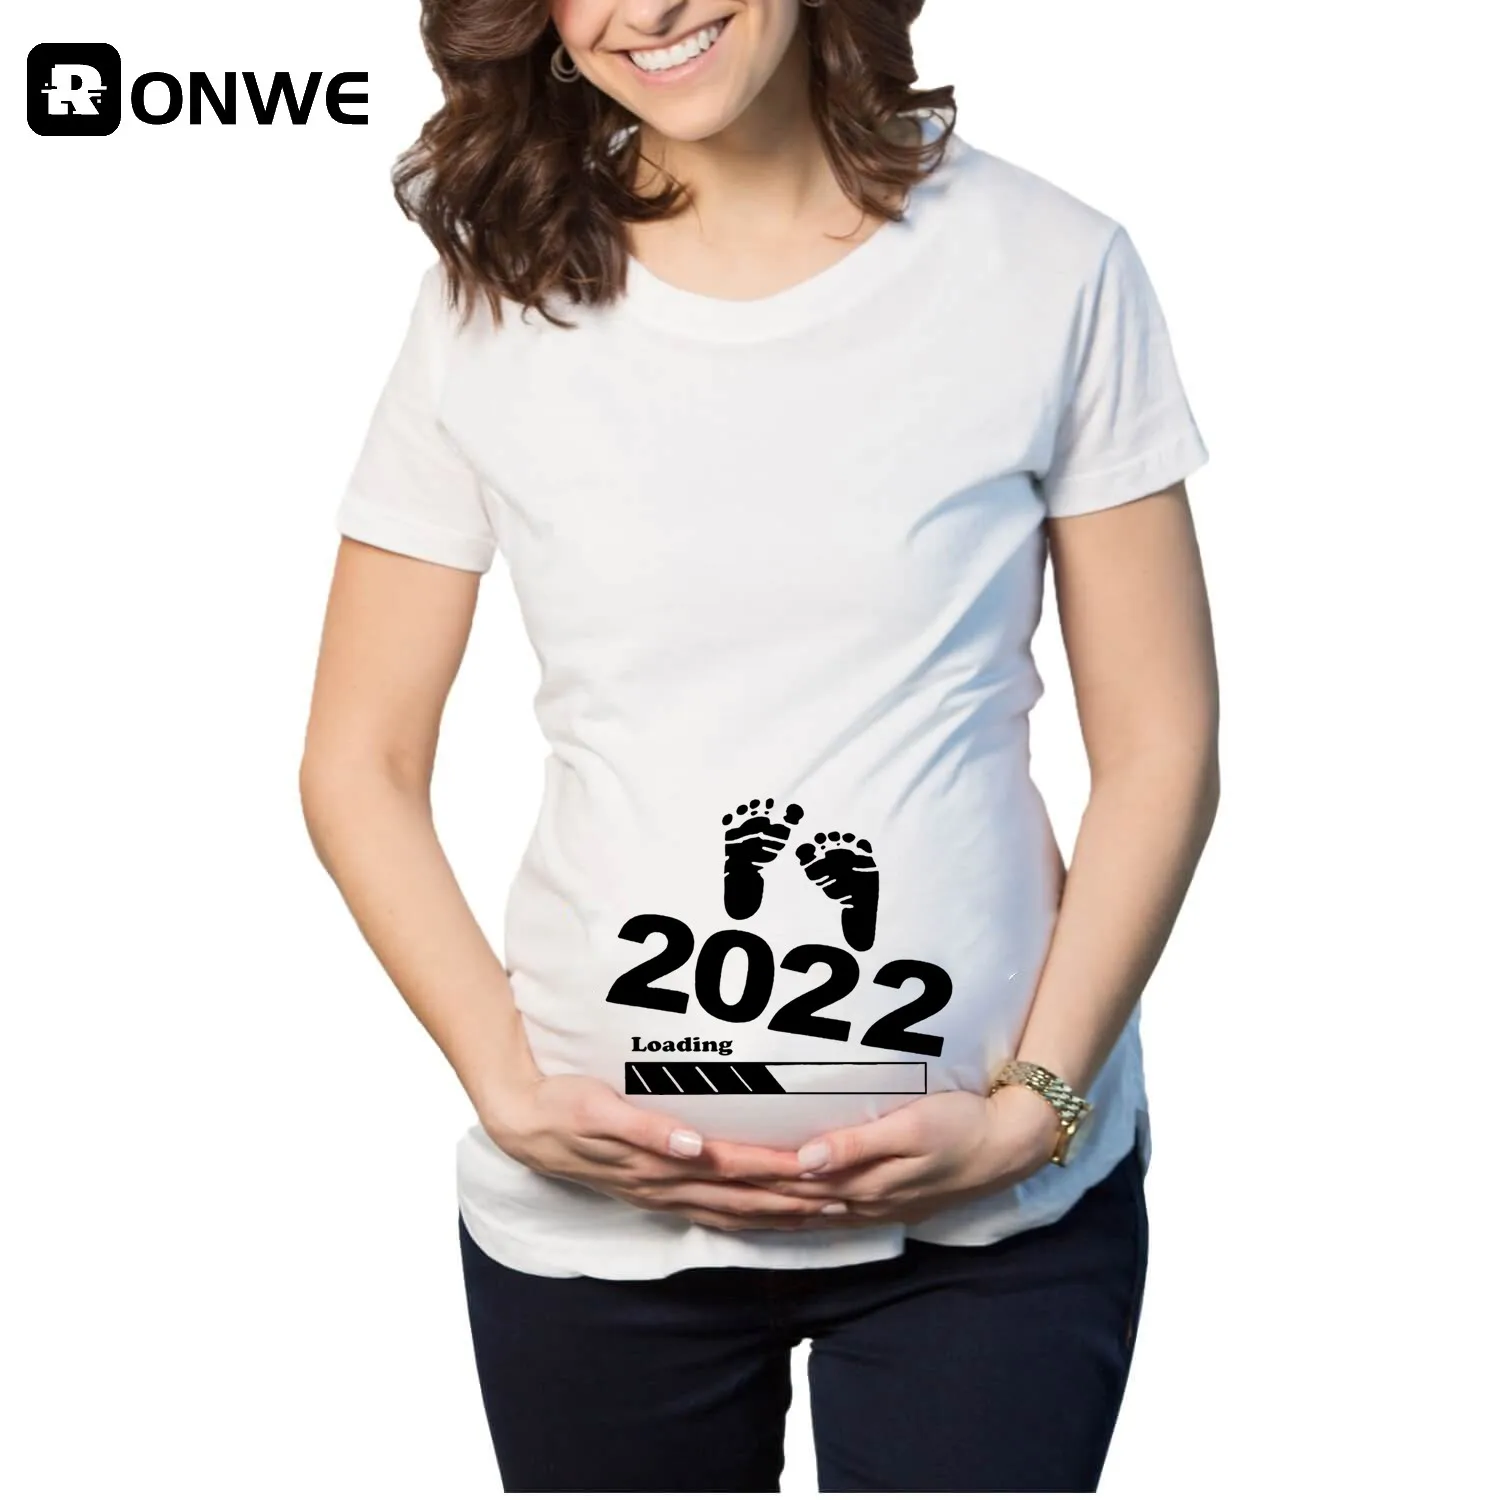 Pregnant Baby Loading 2022 Funny Women T Shirt Girl Maternity Pregnancy Announcement Shirt New Mom Big Size Clothes,Drop Ship black and white striped shirt Tees